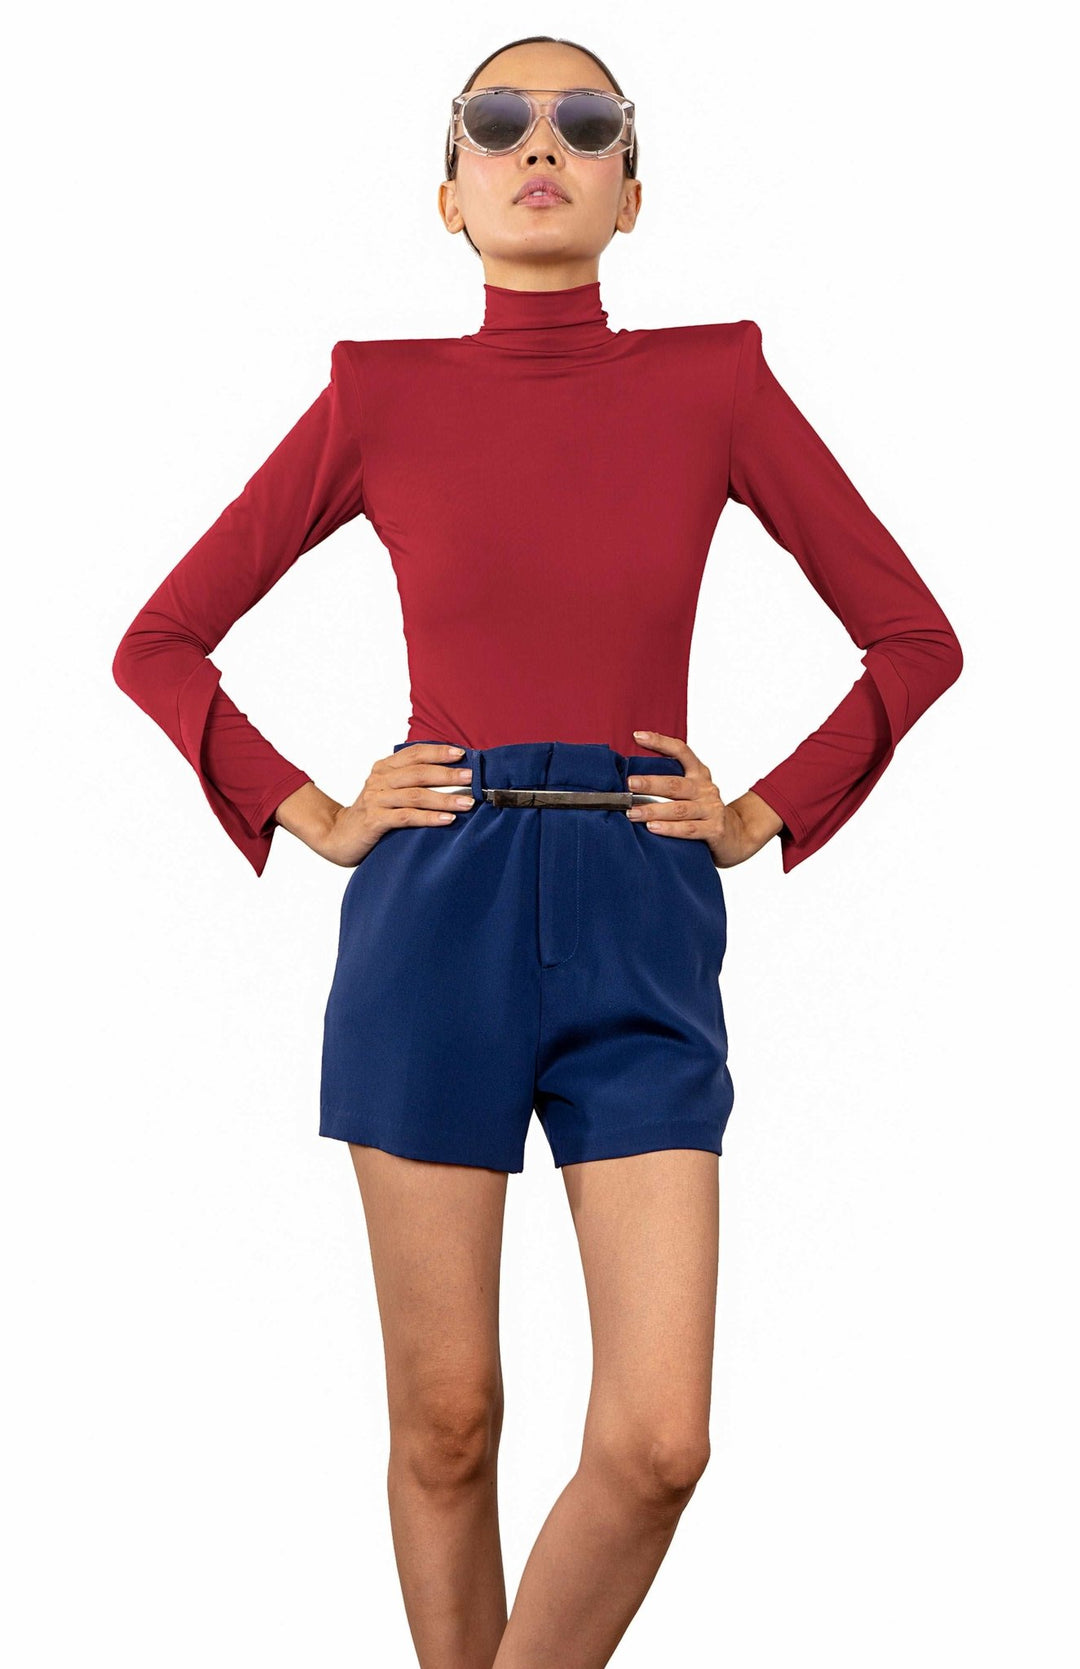 Red, high shoulder pad bodysuit with a turtleneck and long draped sleeves.